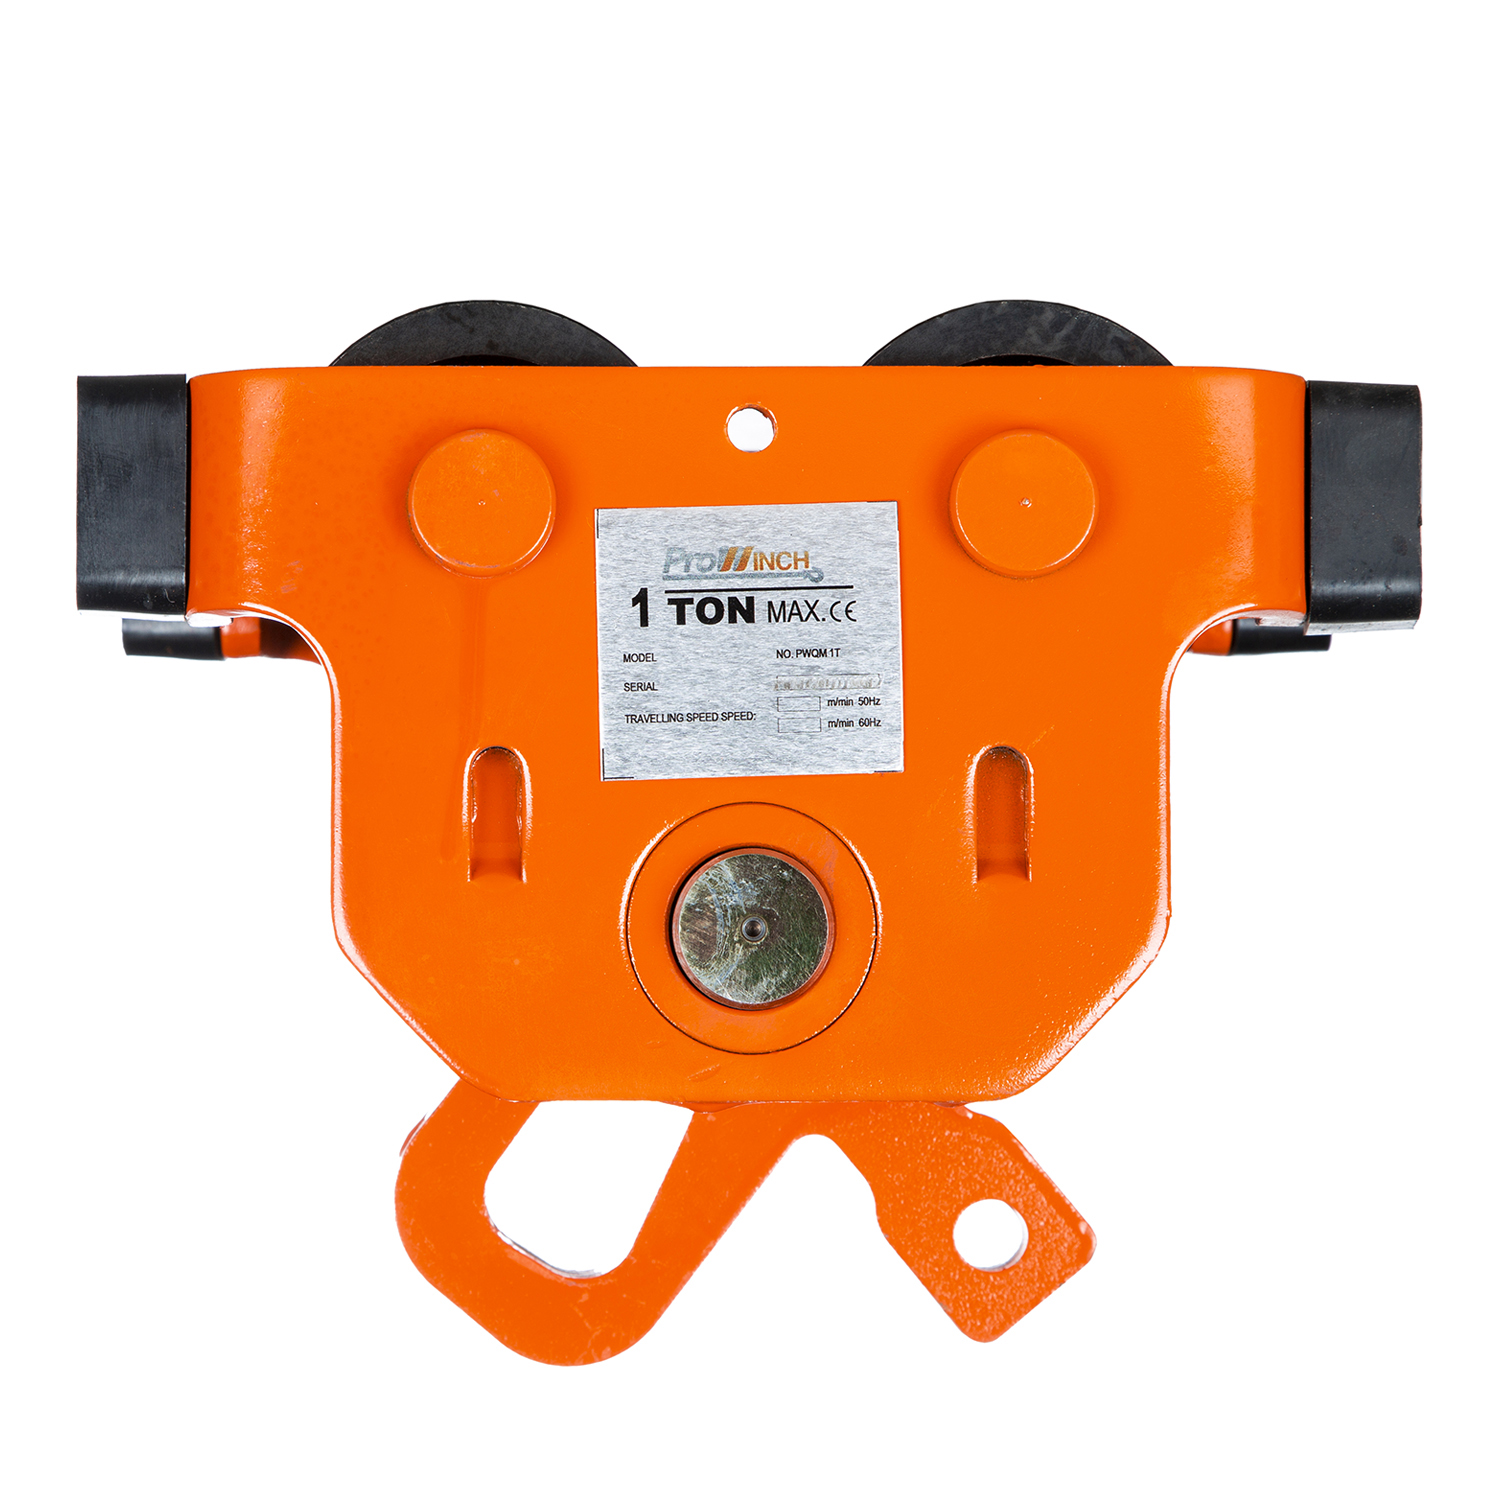 Prowinch 1 Ton I Beam Manual Pushing Trolley with rubber bump stops